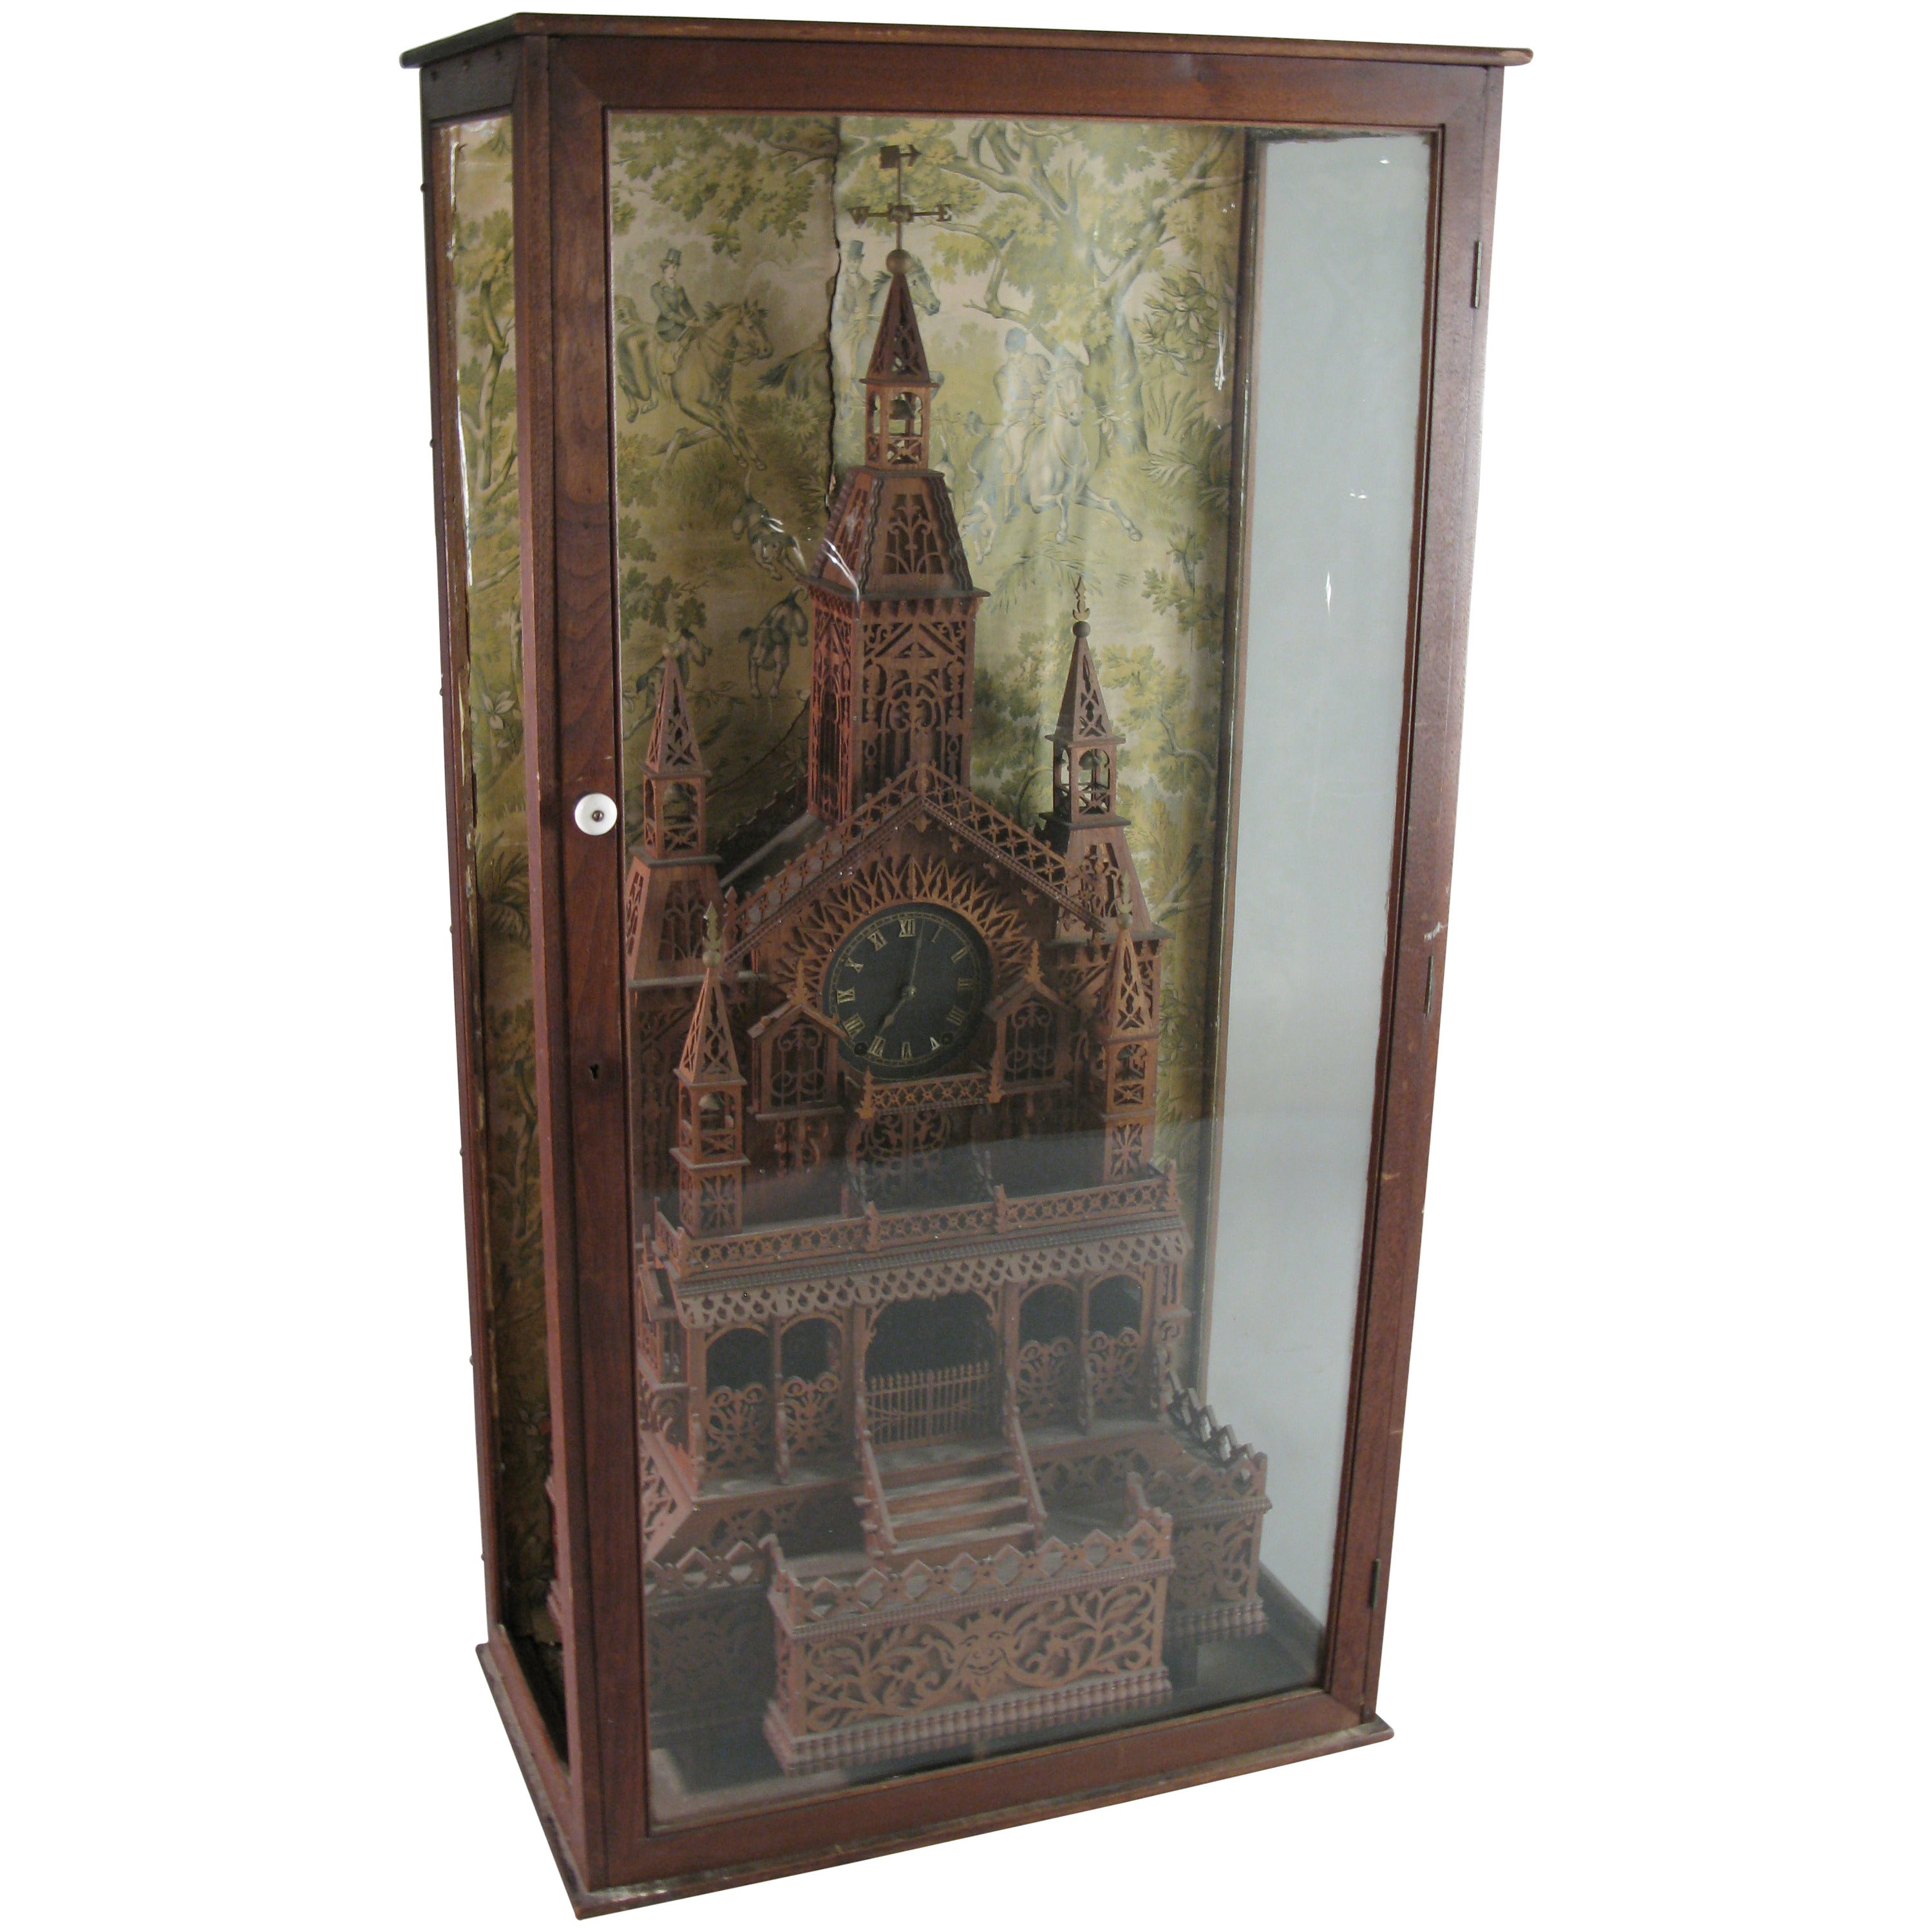 1920s Folk Art Cathedral Mantle Clock in Glass Case